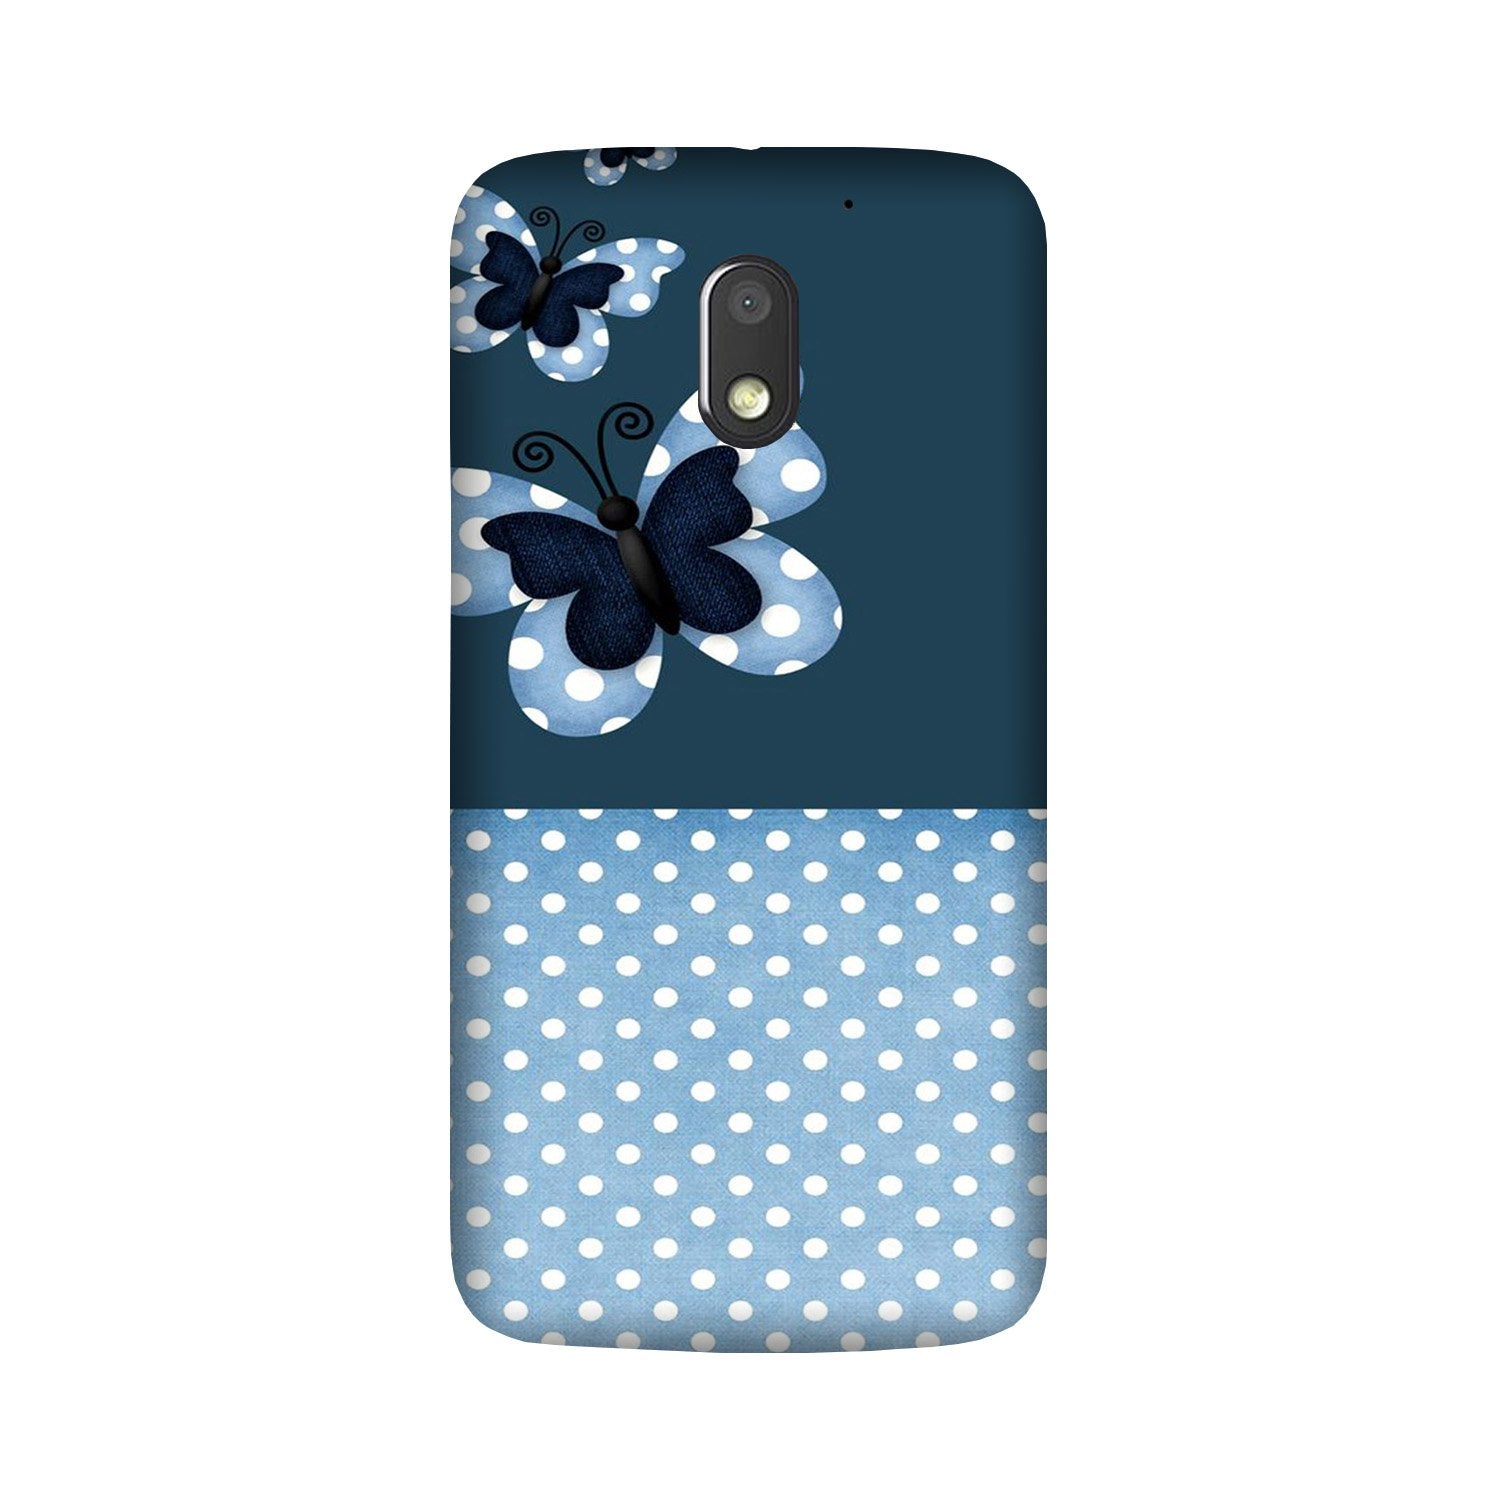 White dots Butterfly Case for Moto G4 Play